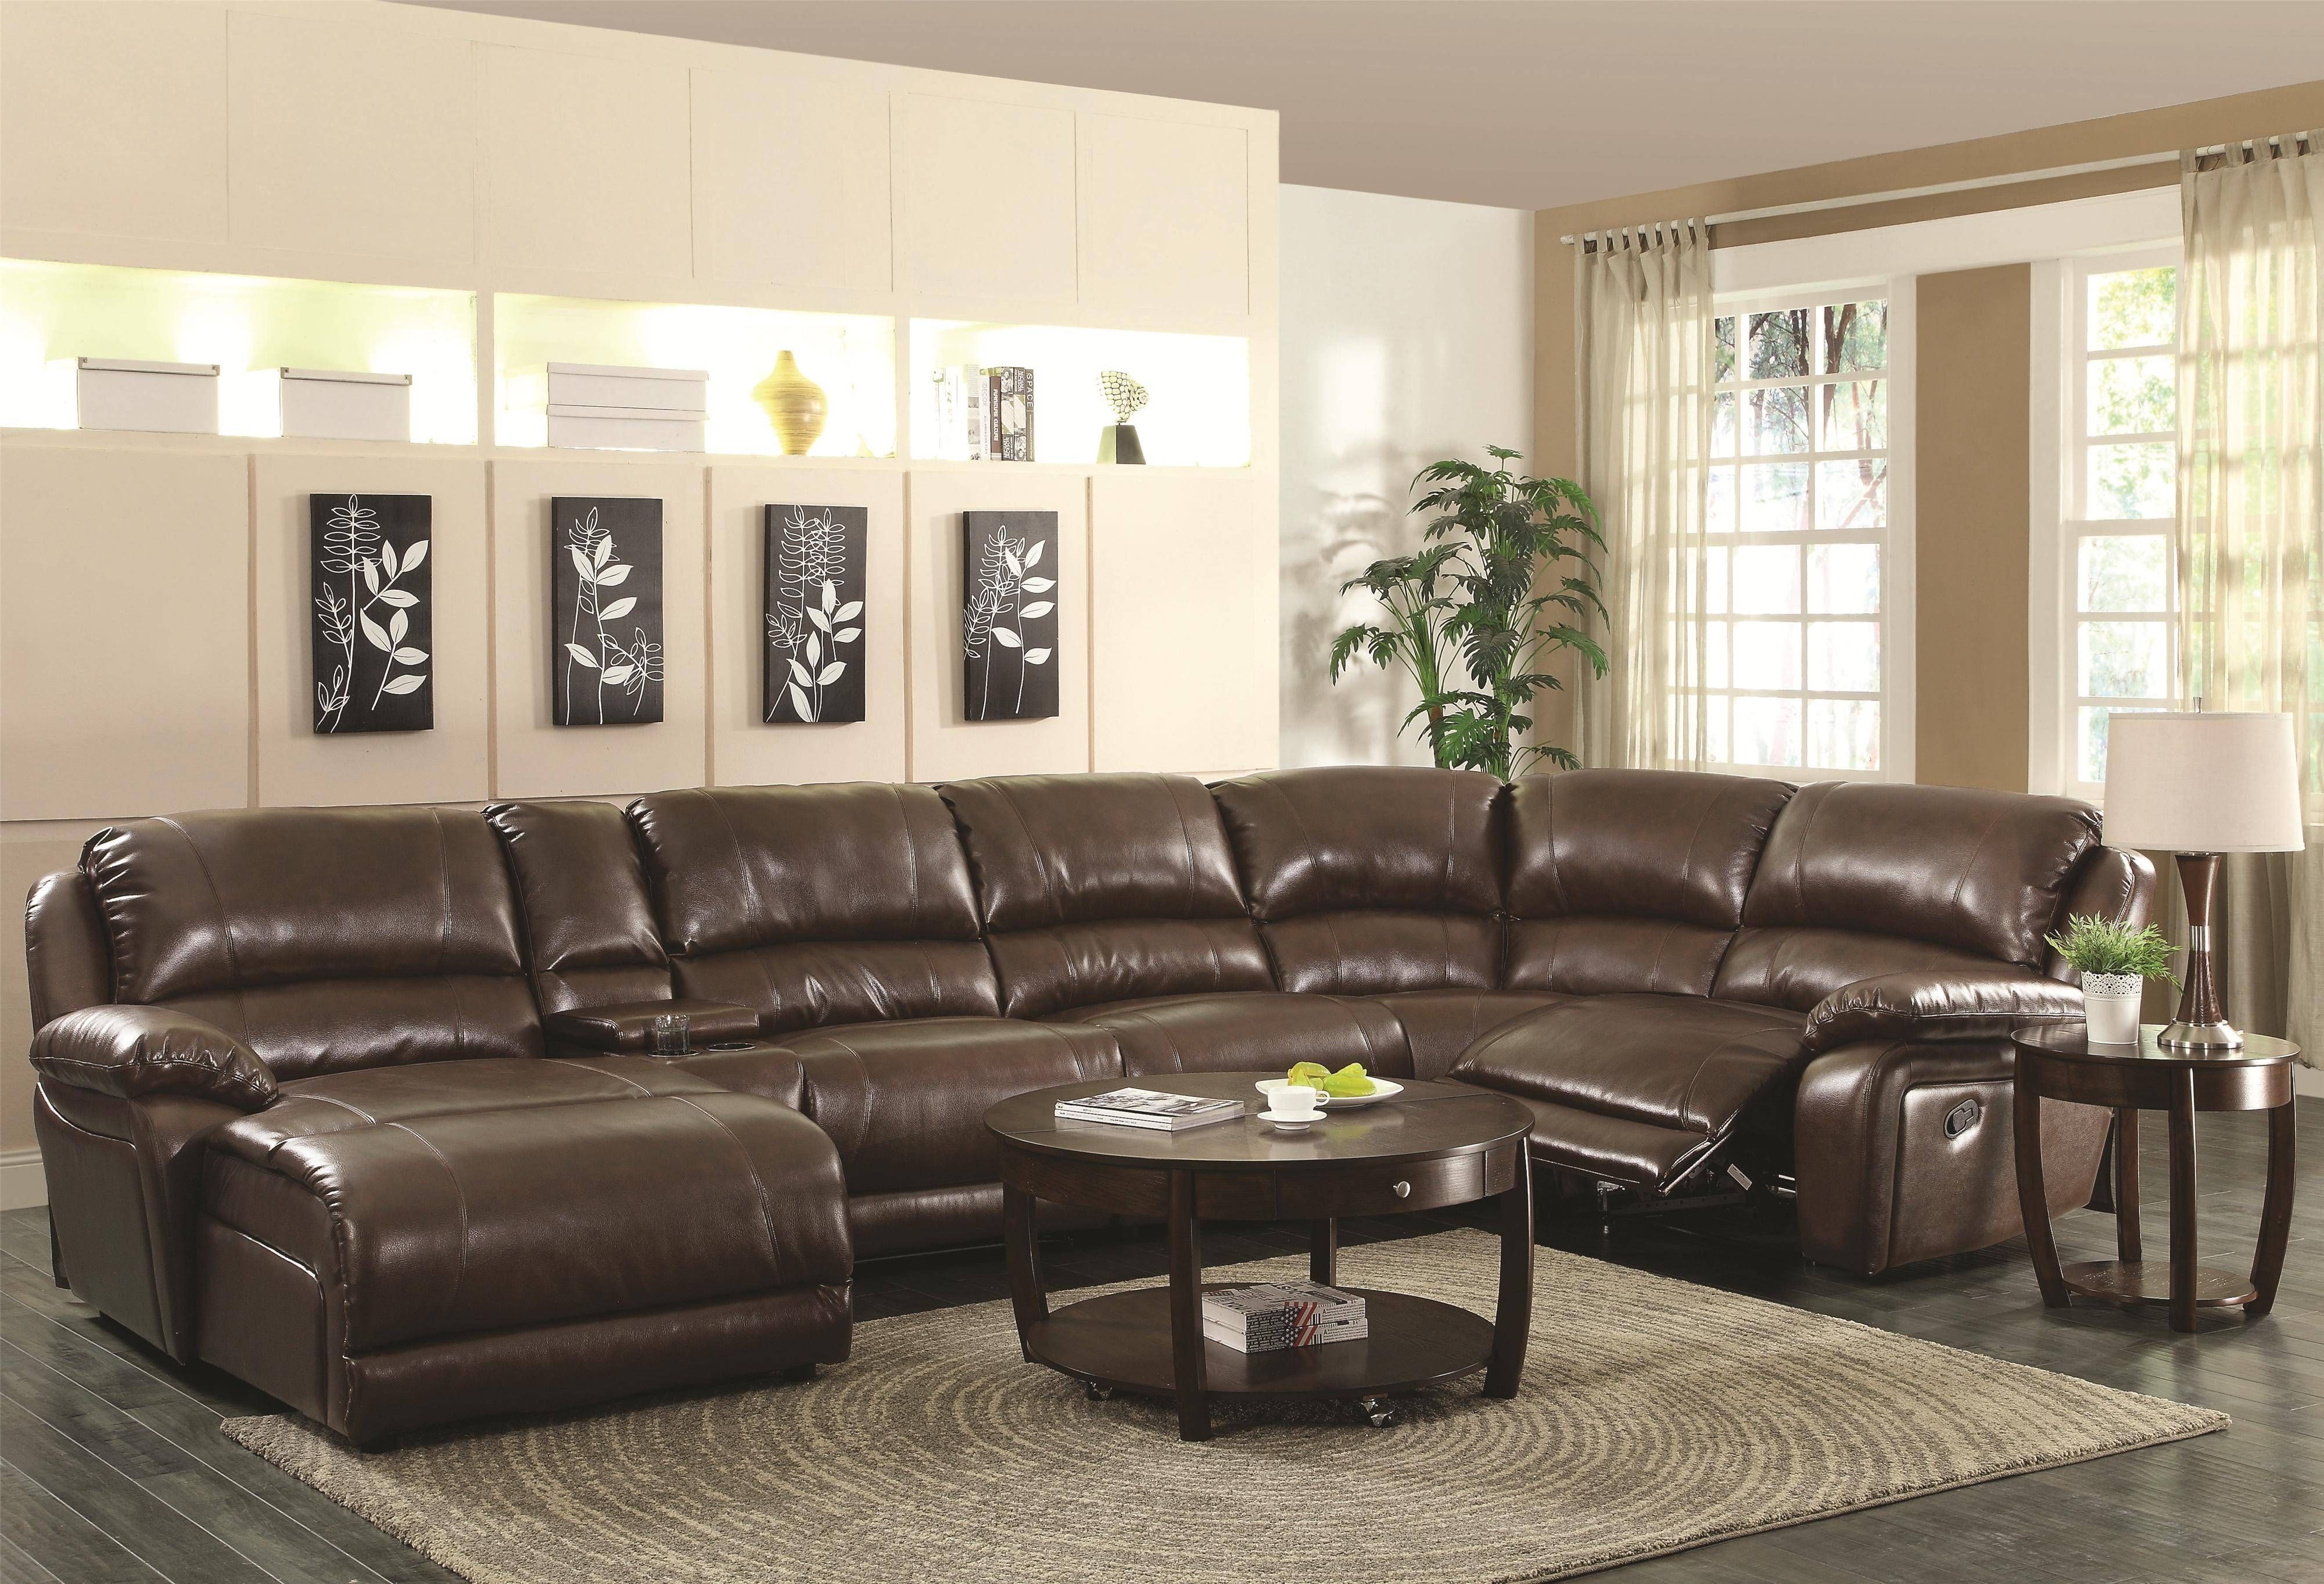 Featured Photo of 30 Collection of 6 Piece Leather Sectional Sofa